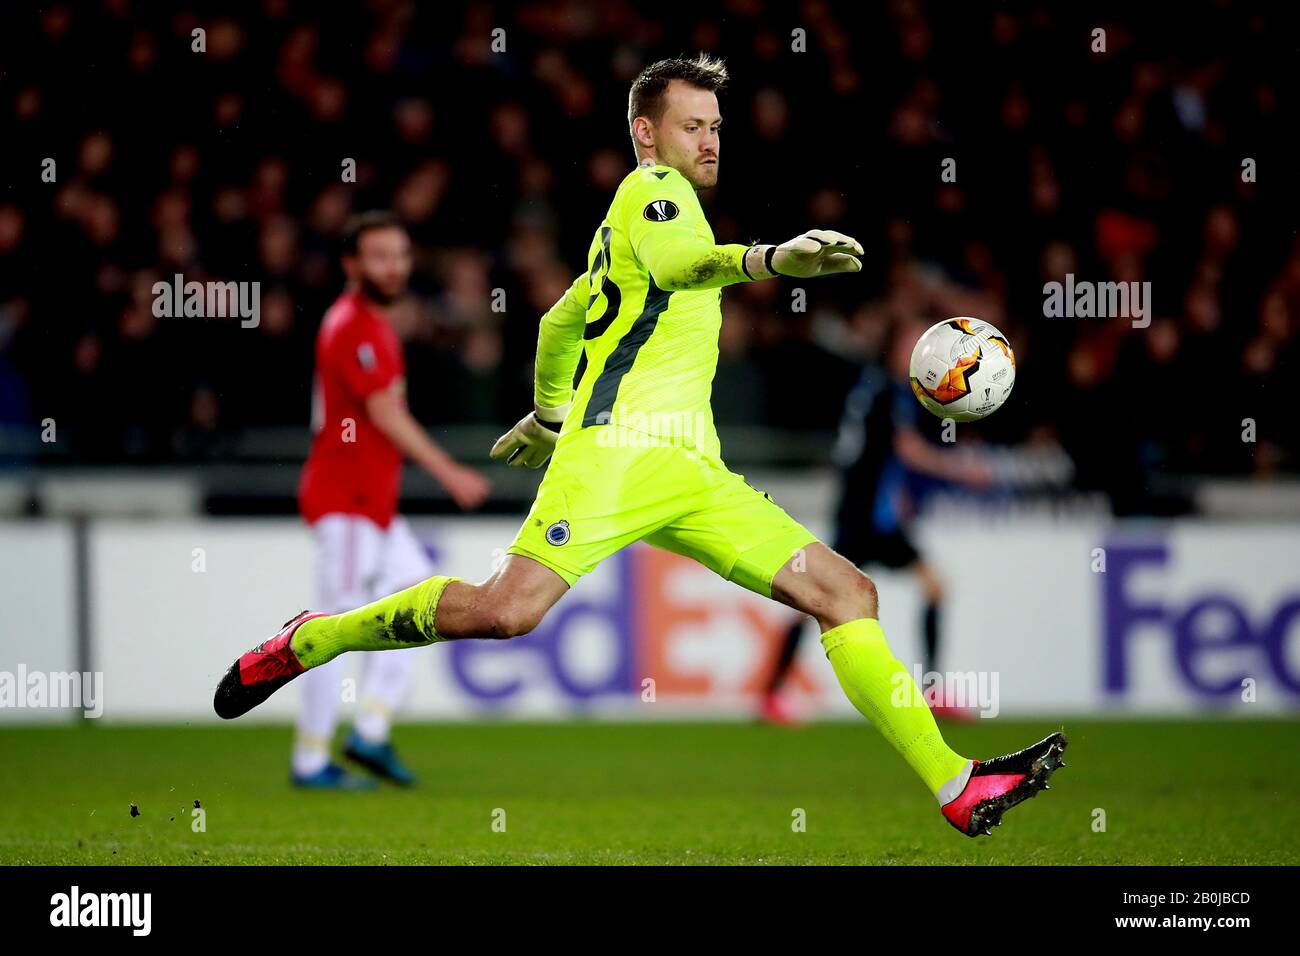 Club Bruges' goalkeeper Simon Mignolet during the UEFA Europa League round of 32 first leg match at the Jan Breydel Stadium, Bruges. Stock Photo